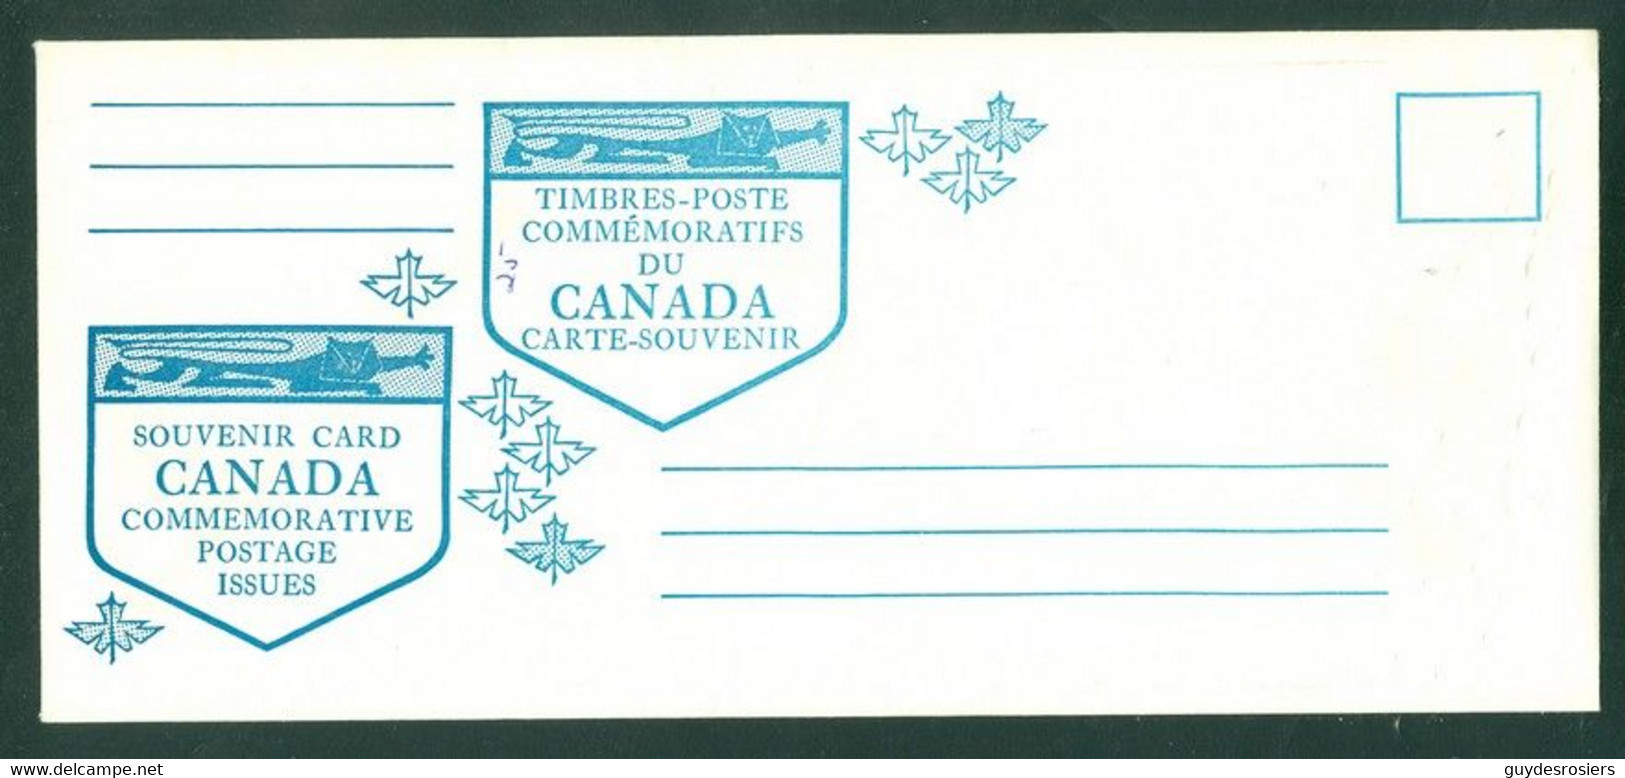 Histoire Du Canada En Timbres-poste / Canadian History In Postage Stamps; + Enveloppe; Année / Year 1966 (7555-A) - Covers & Documents